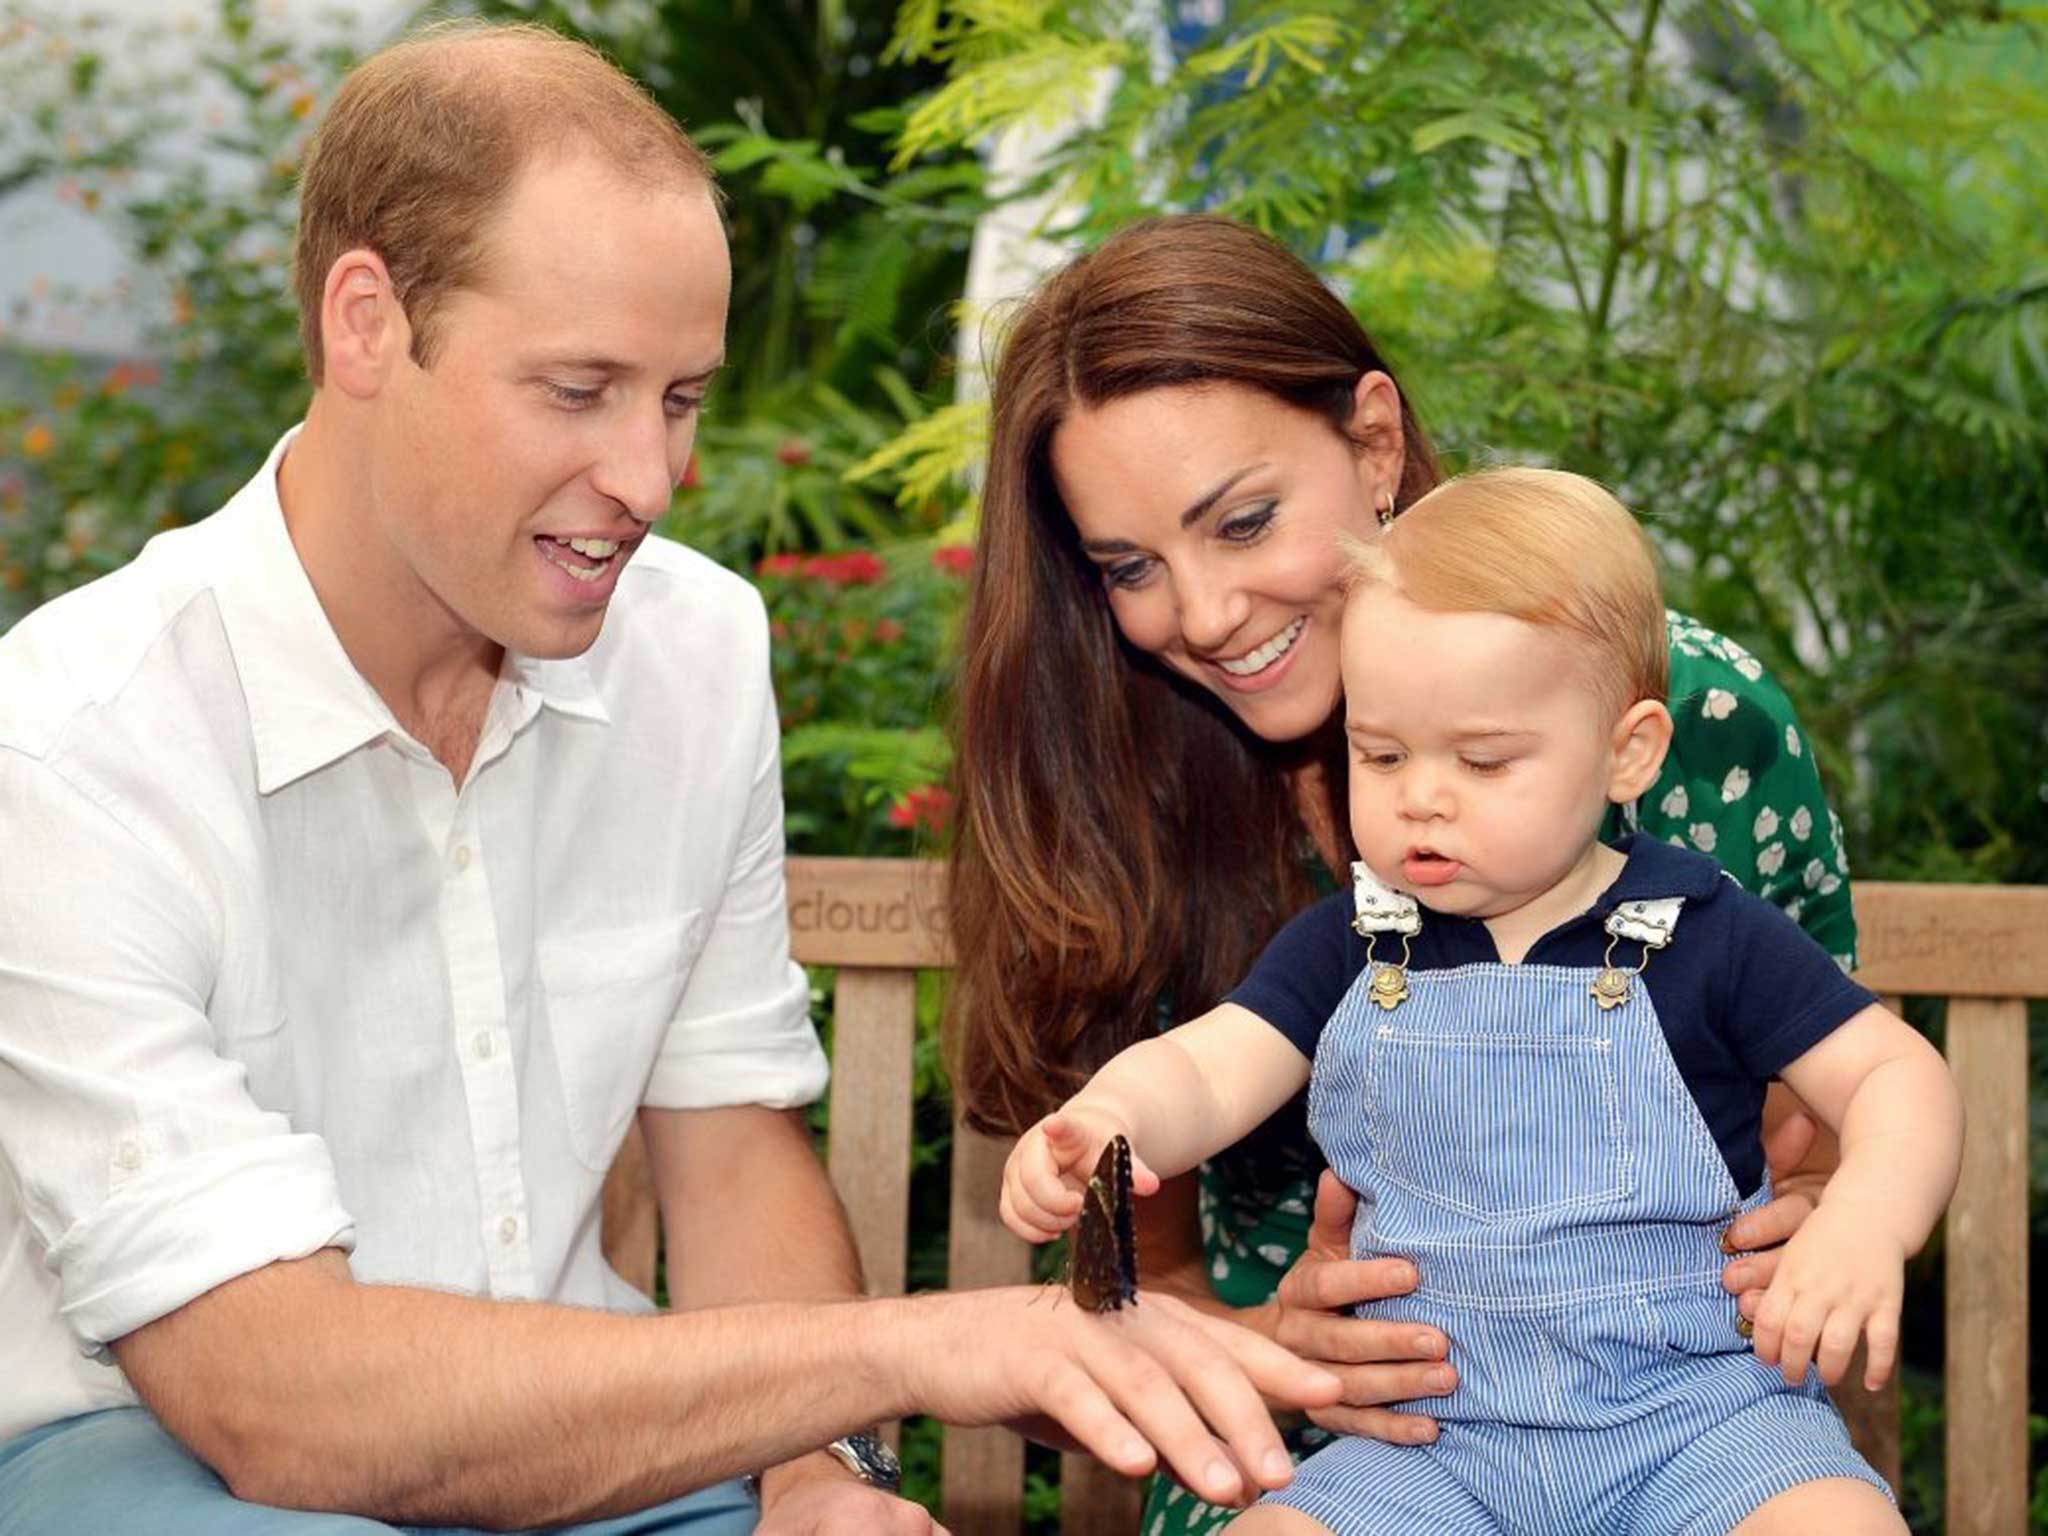 The Duke and Duchess of Cambridge with George - who will soon be a big brother